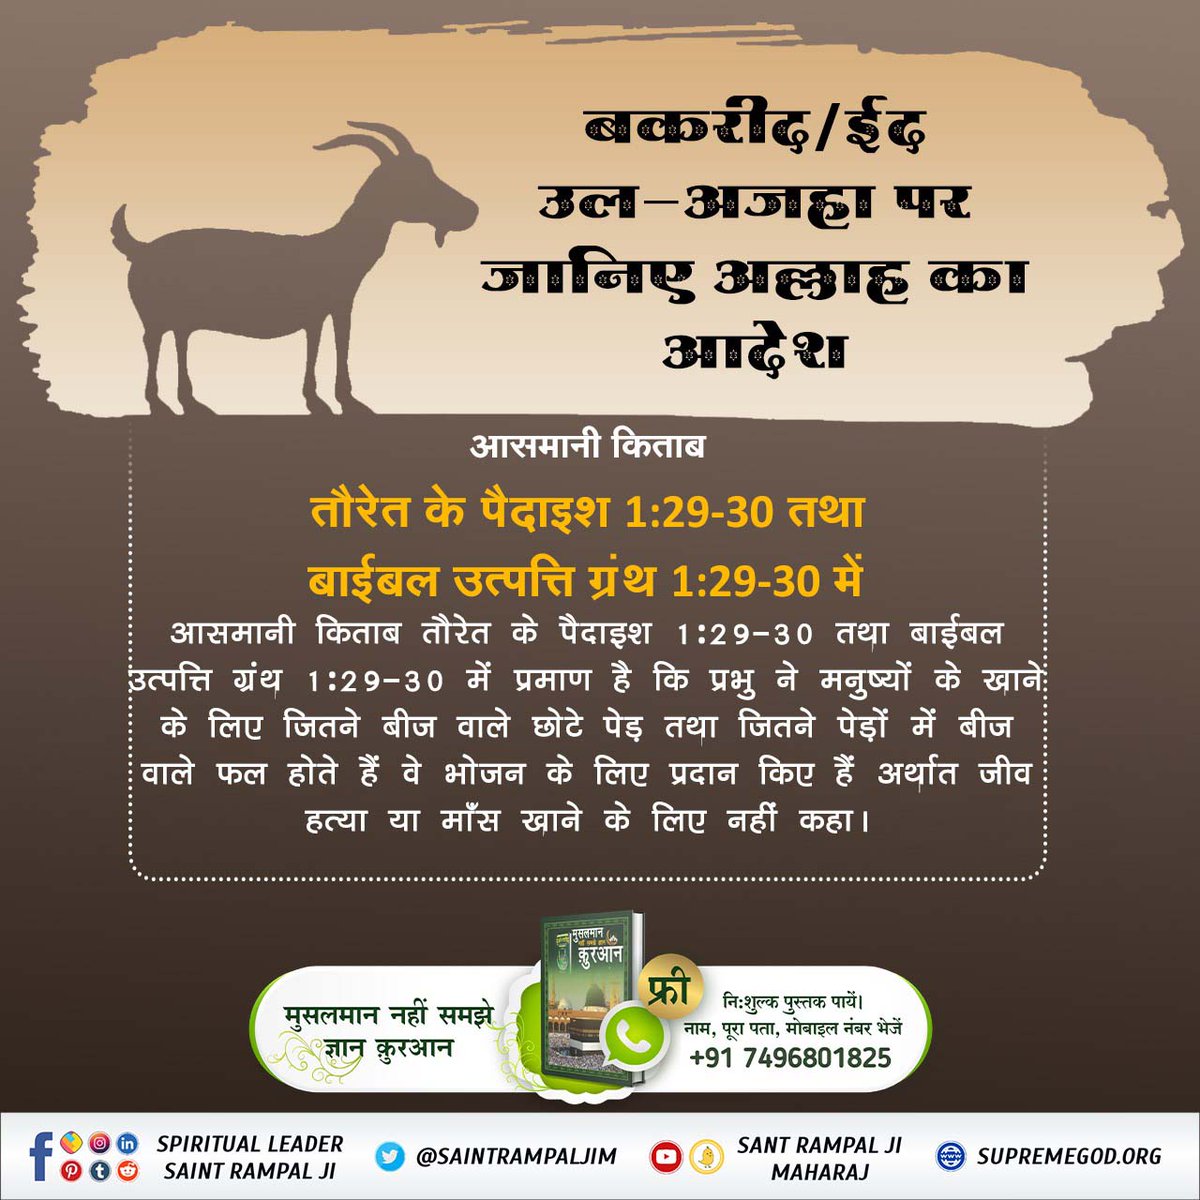 #रहम_करो_मूक_जीवों_पर
In the Holy Bible at Genesis 1:30 God said - To every beast of the earth, and to every bird of the sky, and to every creature that moves on the earth, in which there is life, I have given every green herb for food; and it was so.